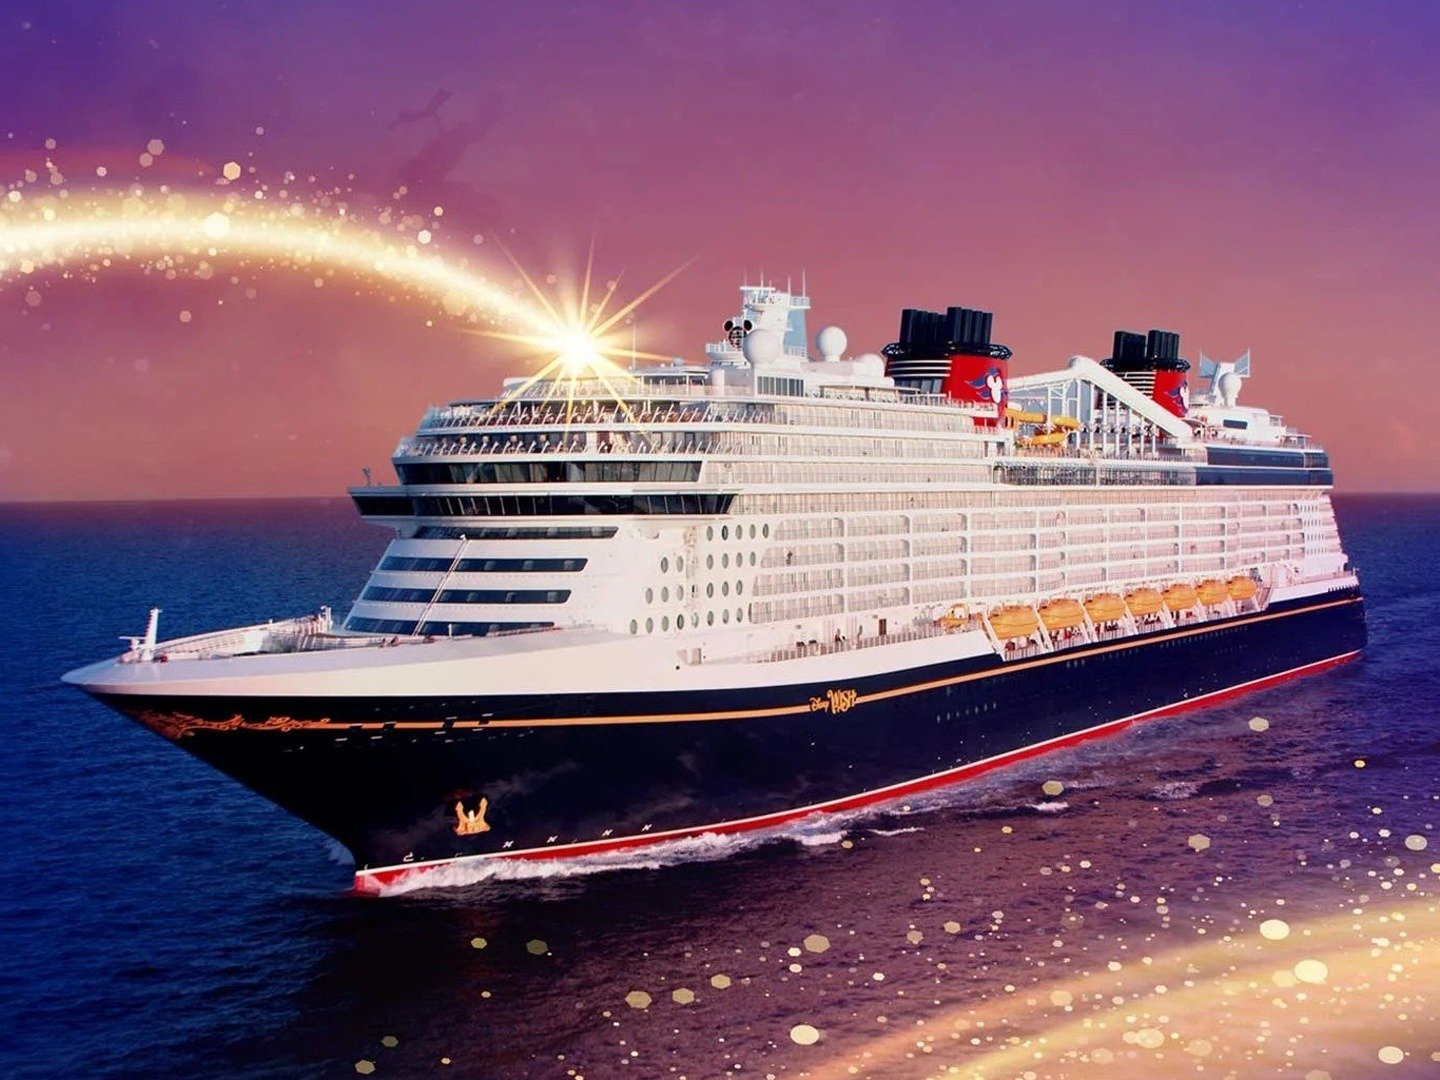 Making the Disney Wish Disney's Newest Cruise Ship on TV Channels